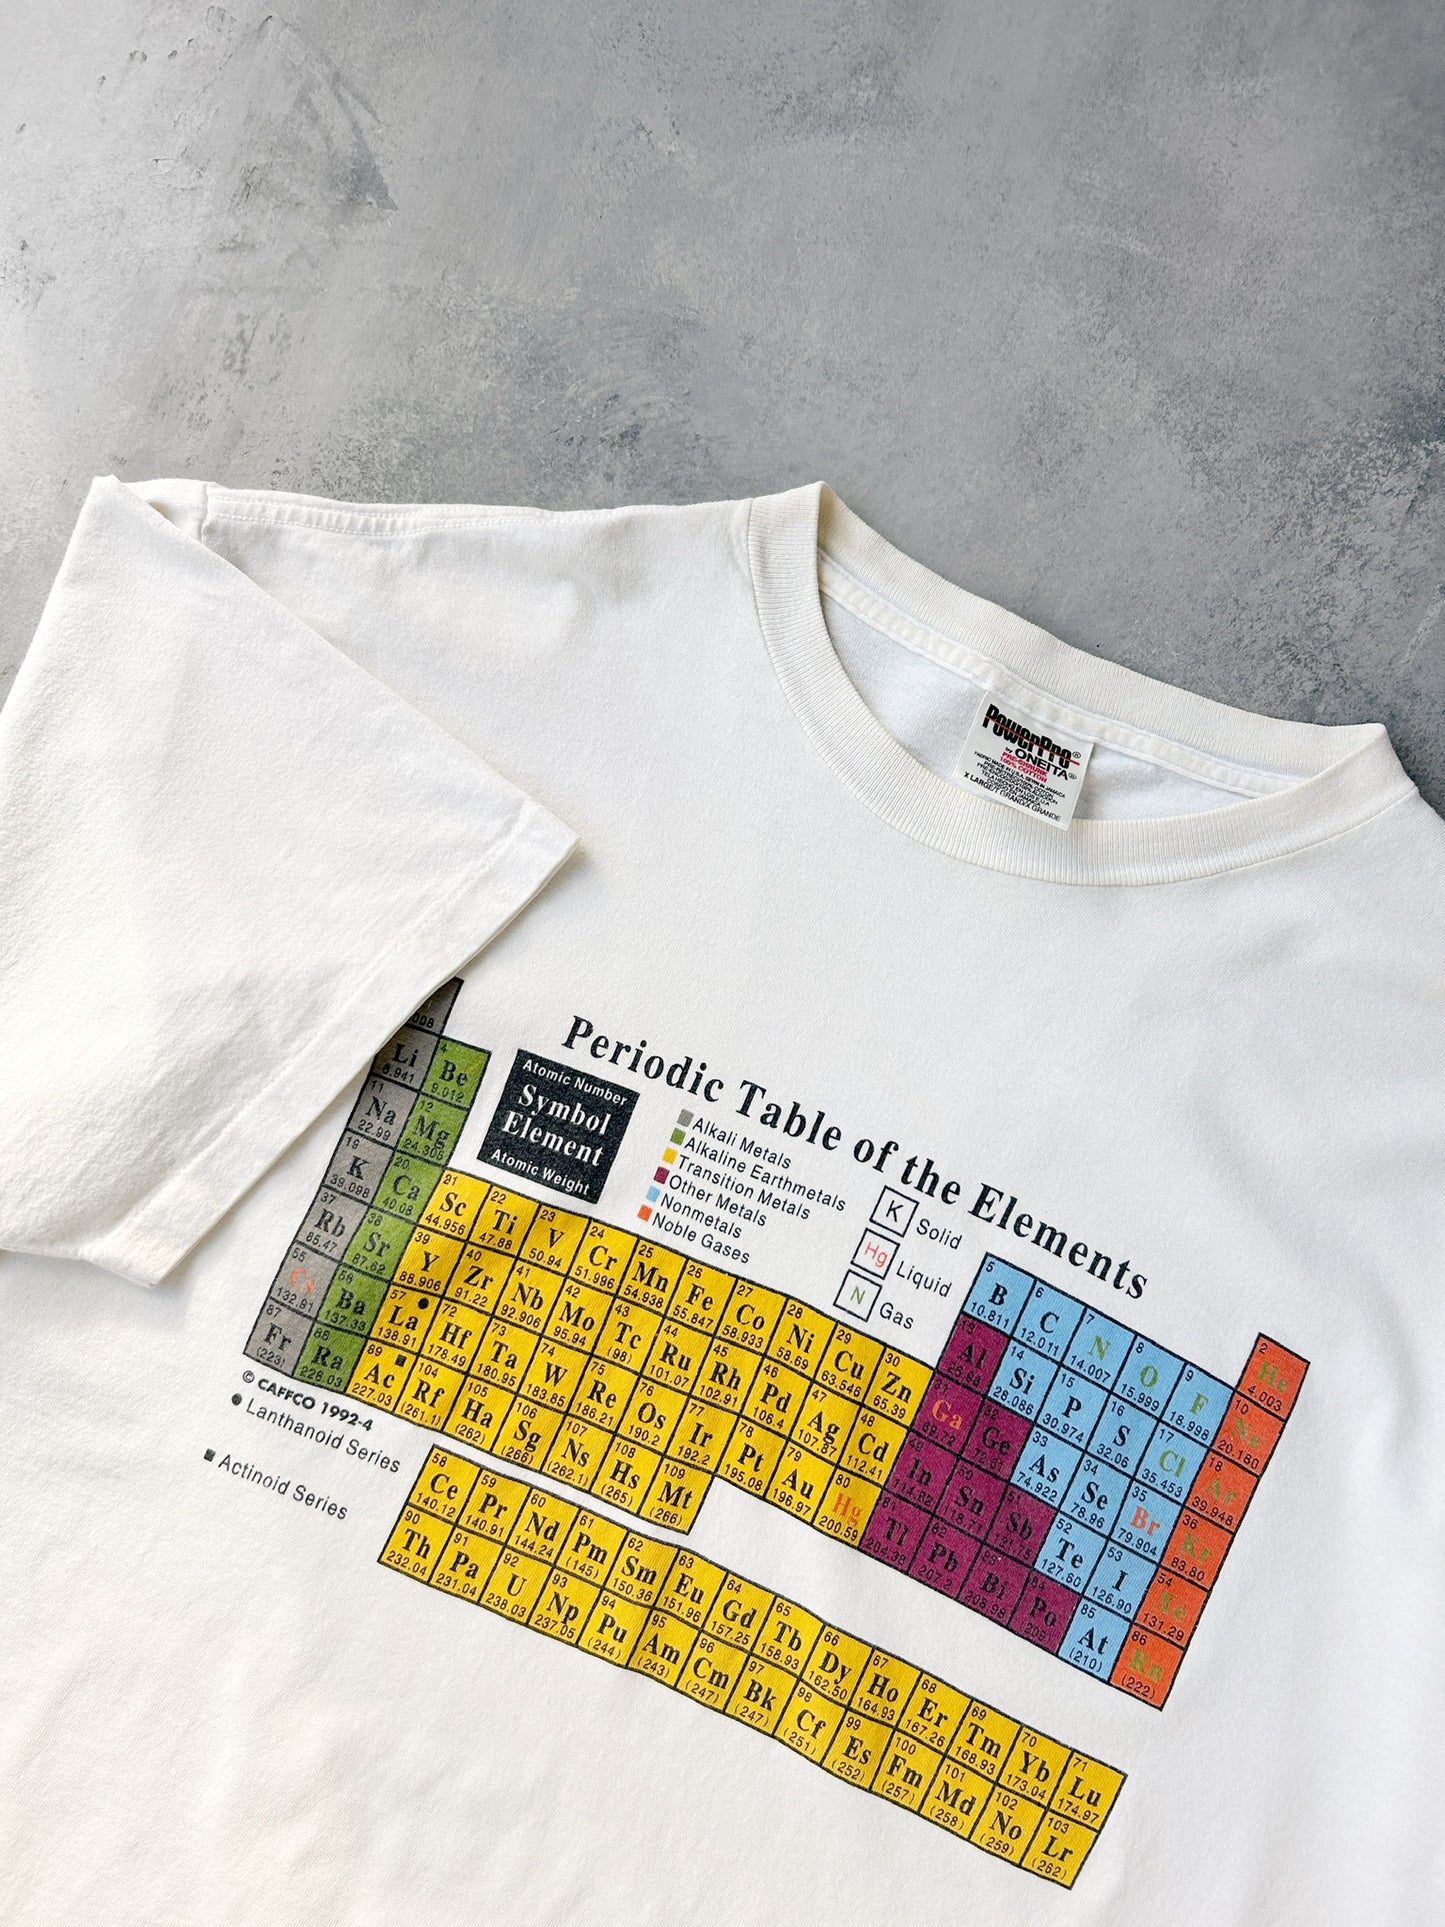 Periodic Table of Elements T-Shirt '94 - XL